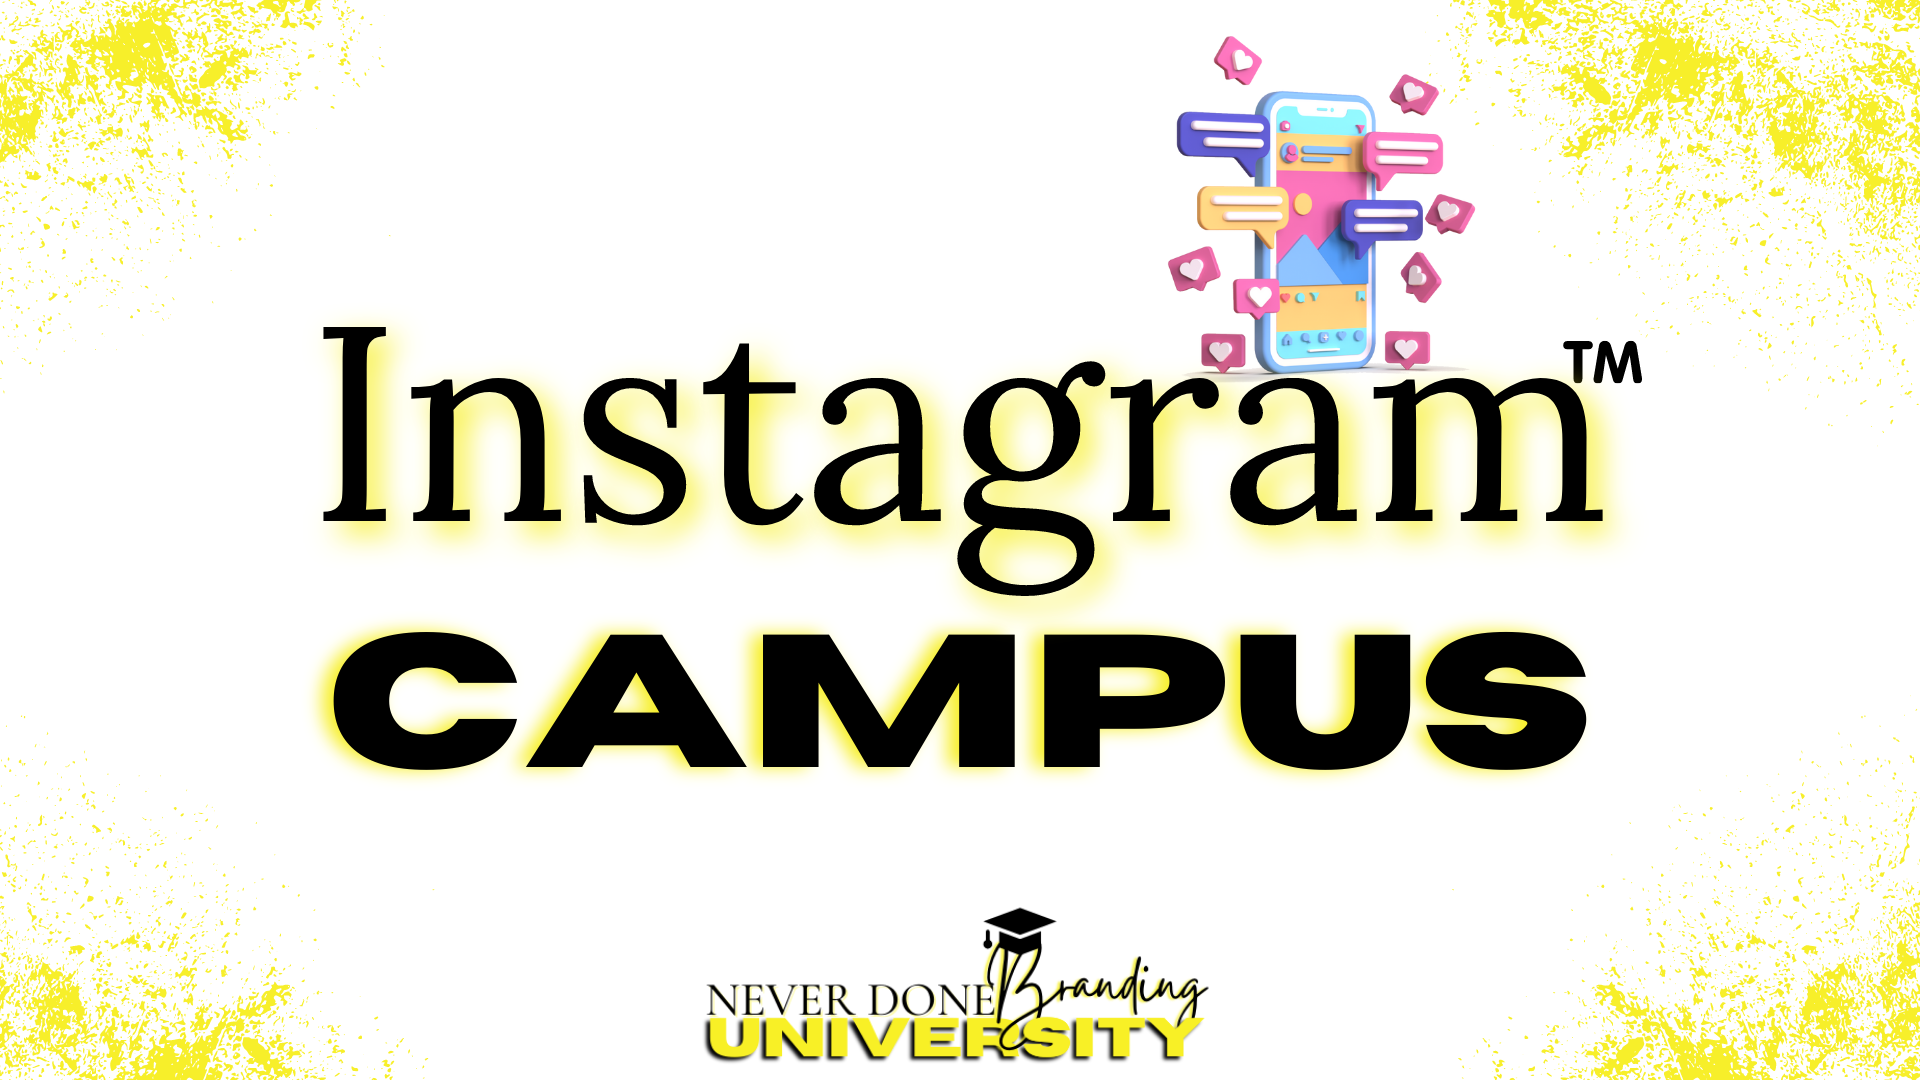 Instagram campus: Learning how to use instagram to market your business